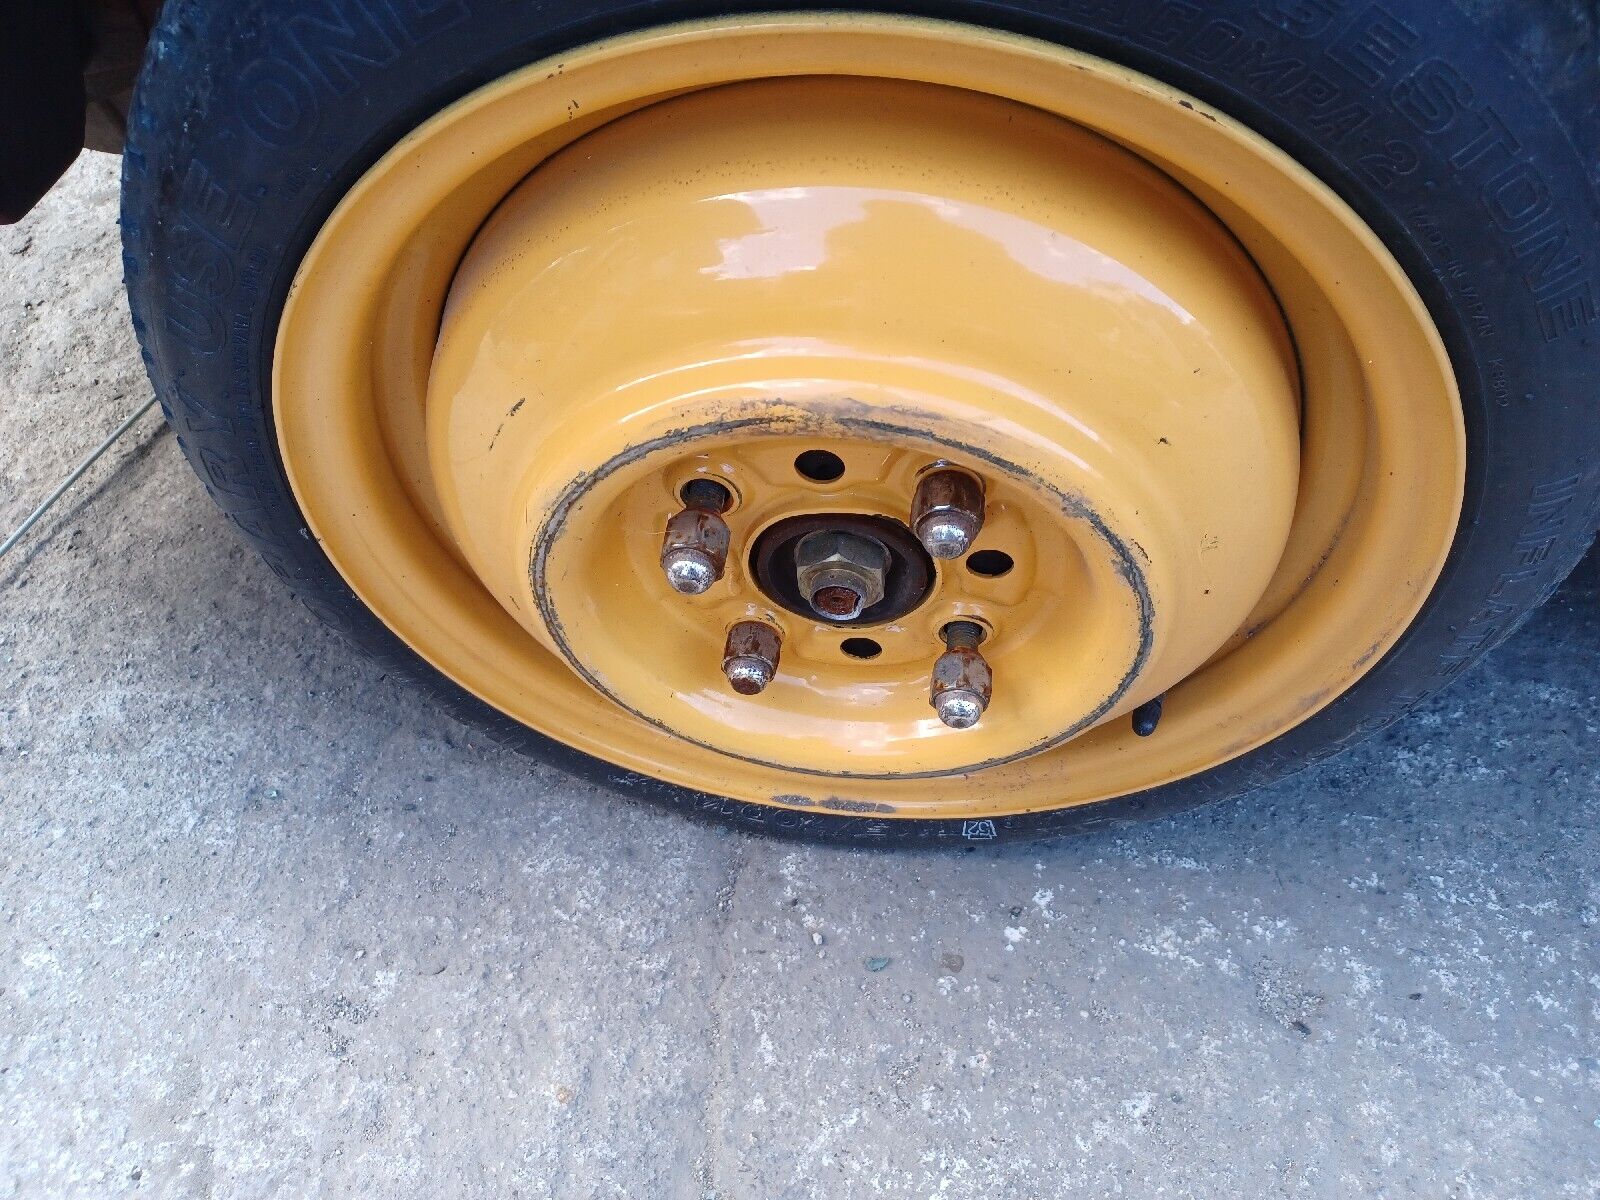 1993 GEO METRO 14 INCH COMPACT SPARE WHEEL 4 LUG USED WITH TIRE